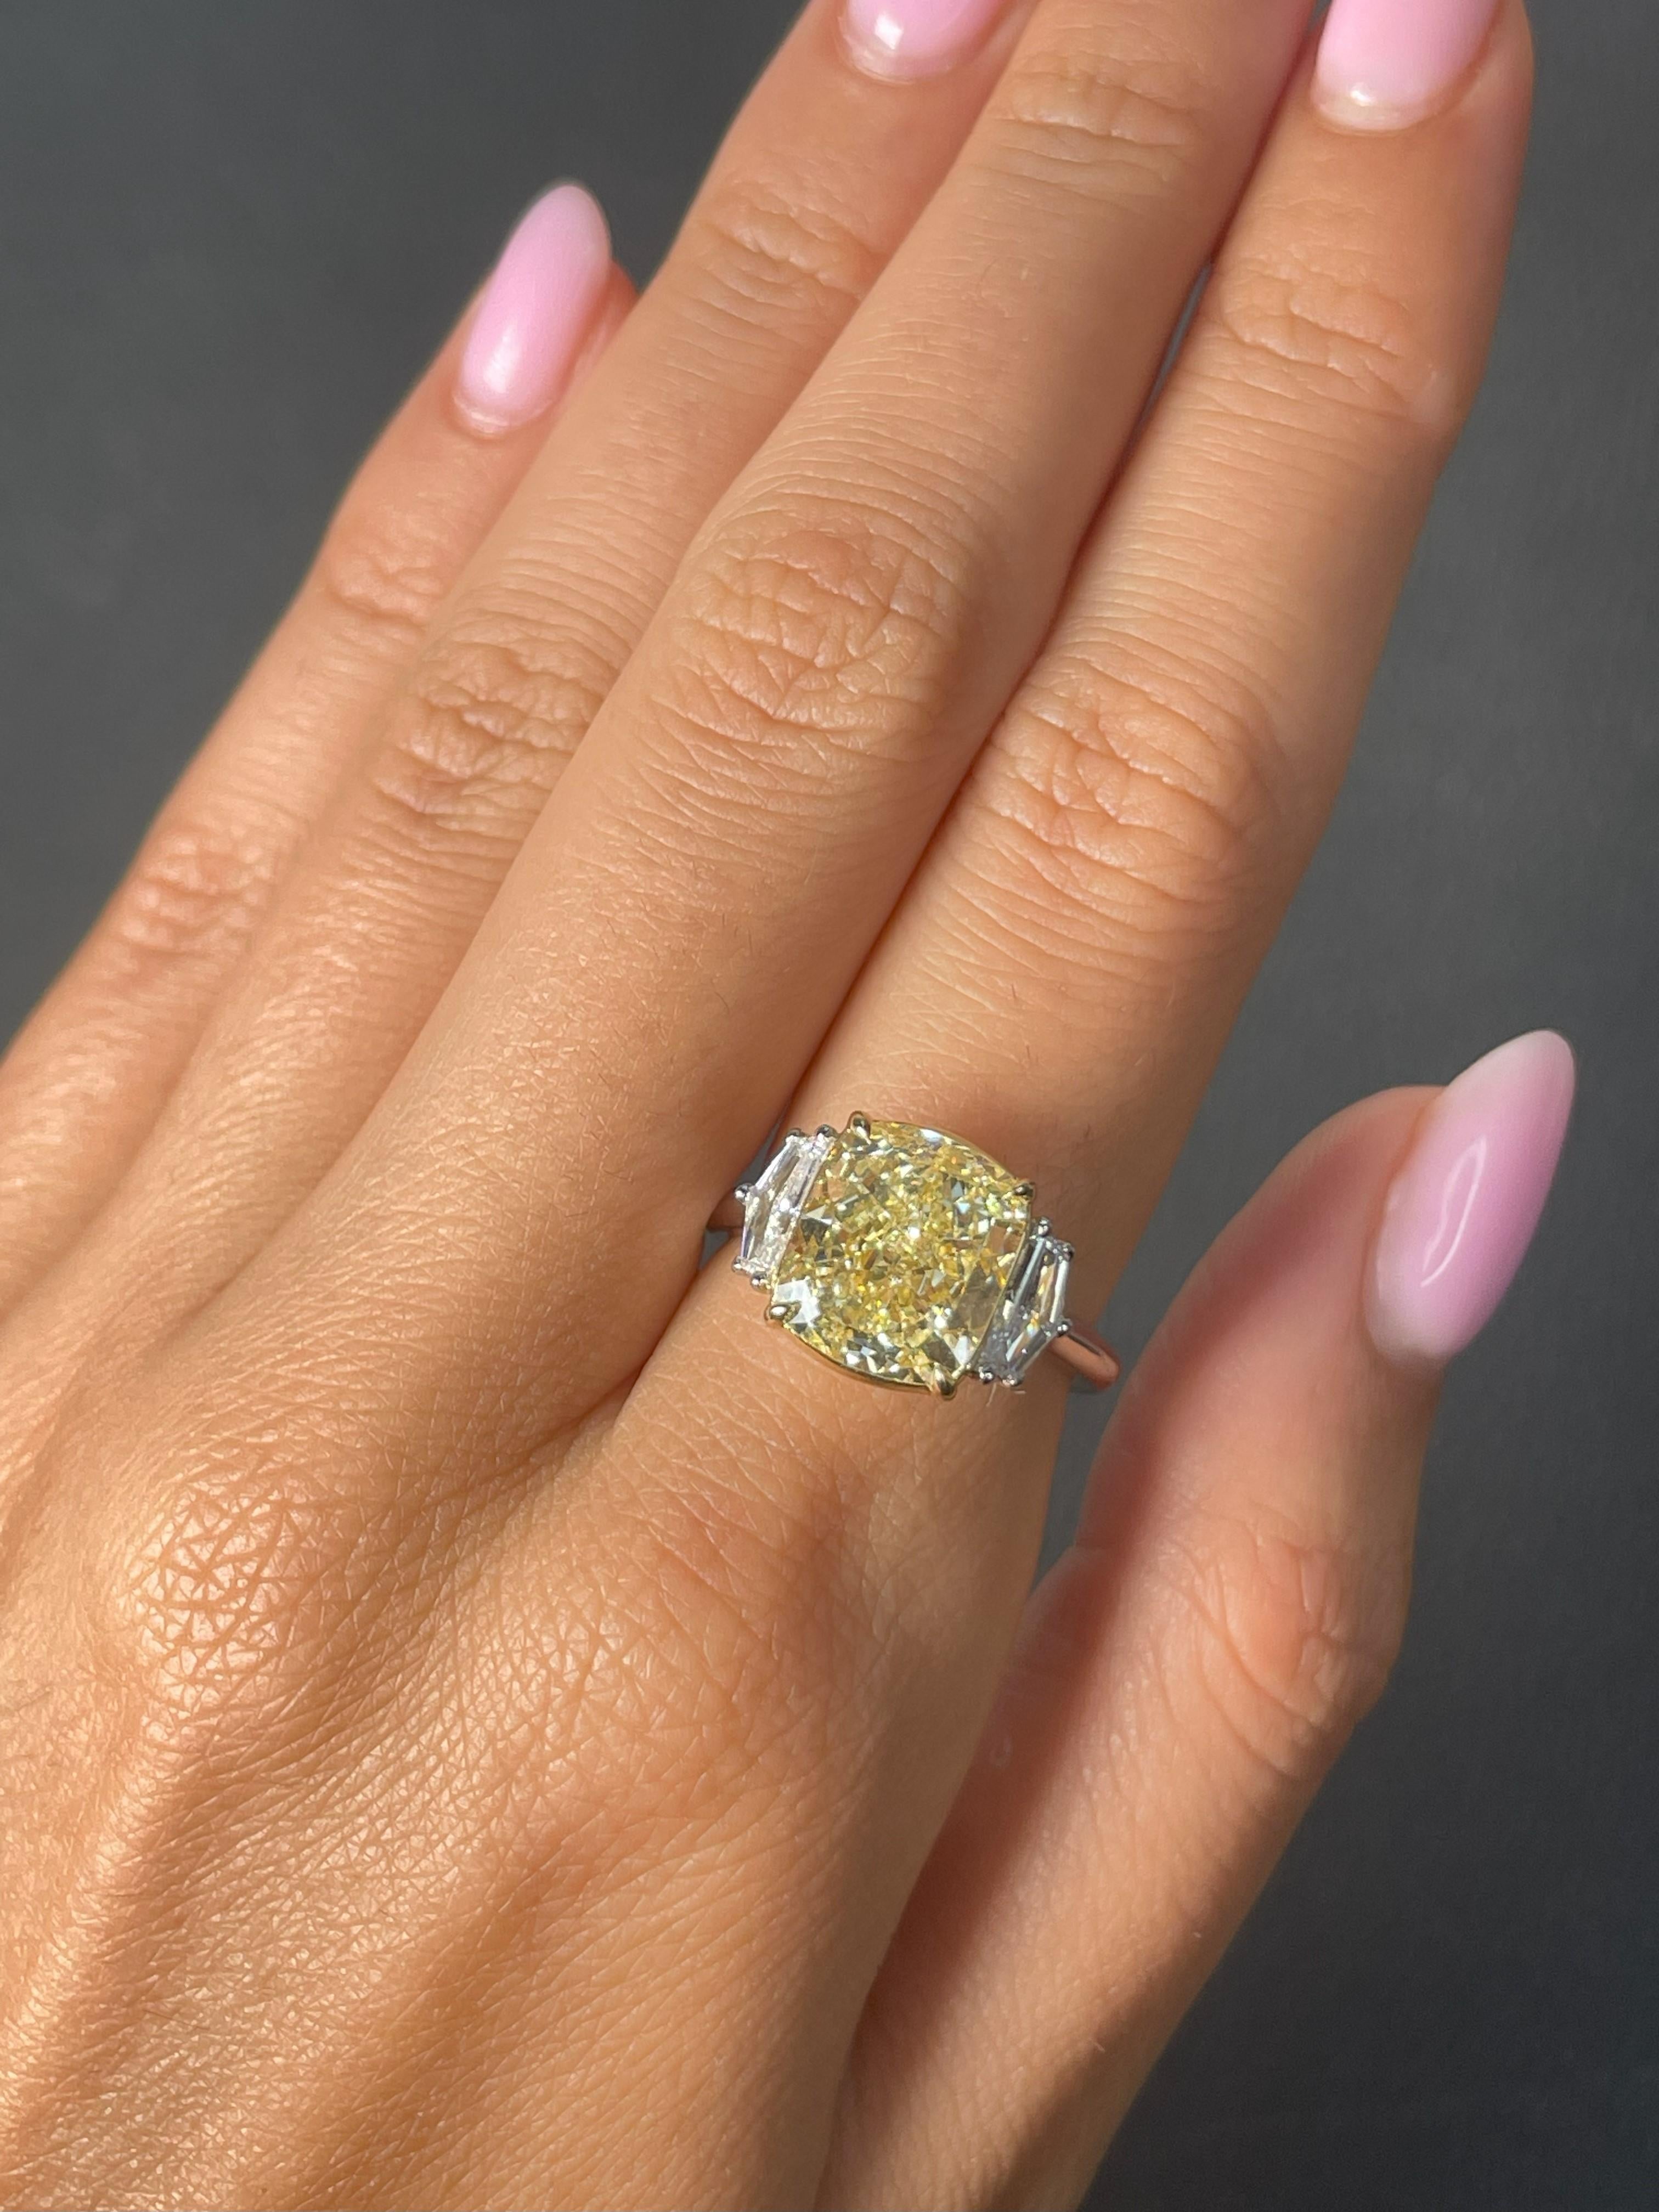 Exquisite Three-Stone Engagement Ring featuring a 5.19 carat Fancy Light Yellow, Cushion-cut diamond. certified by GIA as VS1 in clarity. The center diamond is elegantly accompanied by two Epaulet-cut diamonds with a combined weight of 0.57 carats,